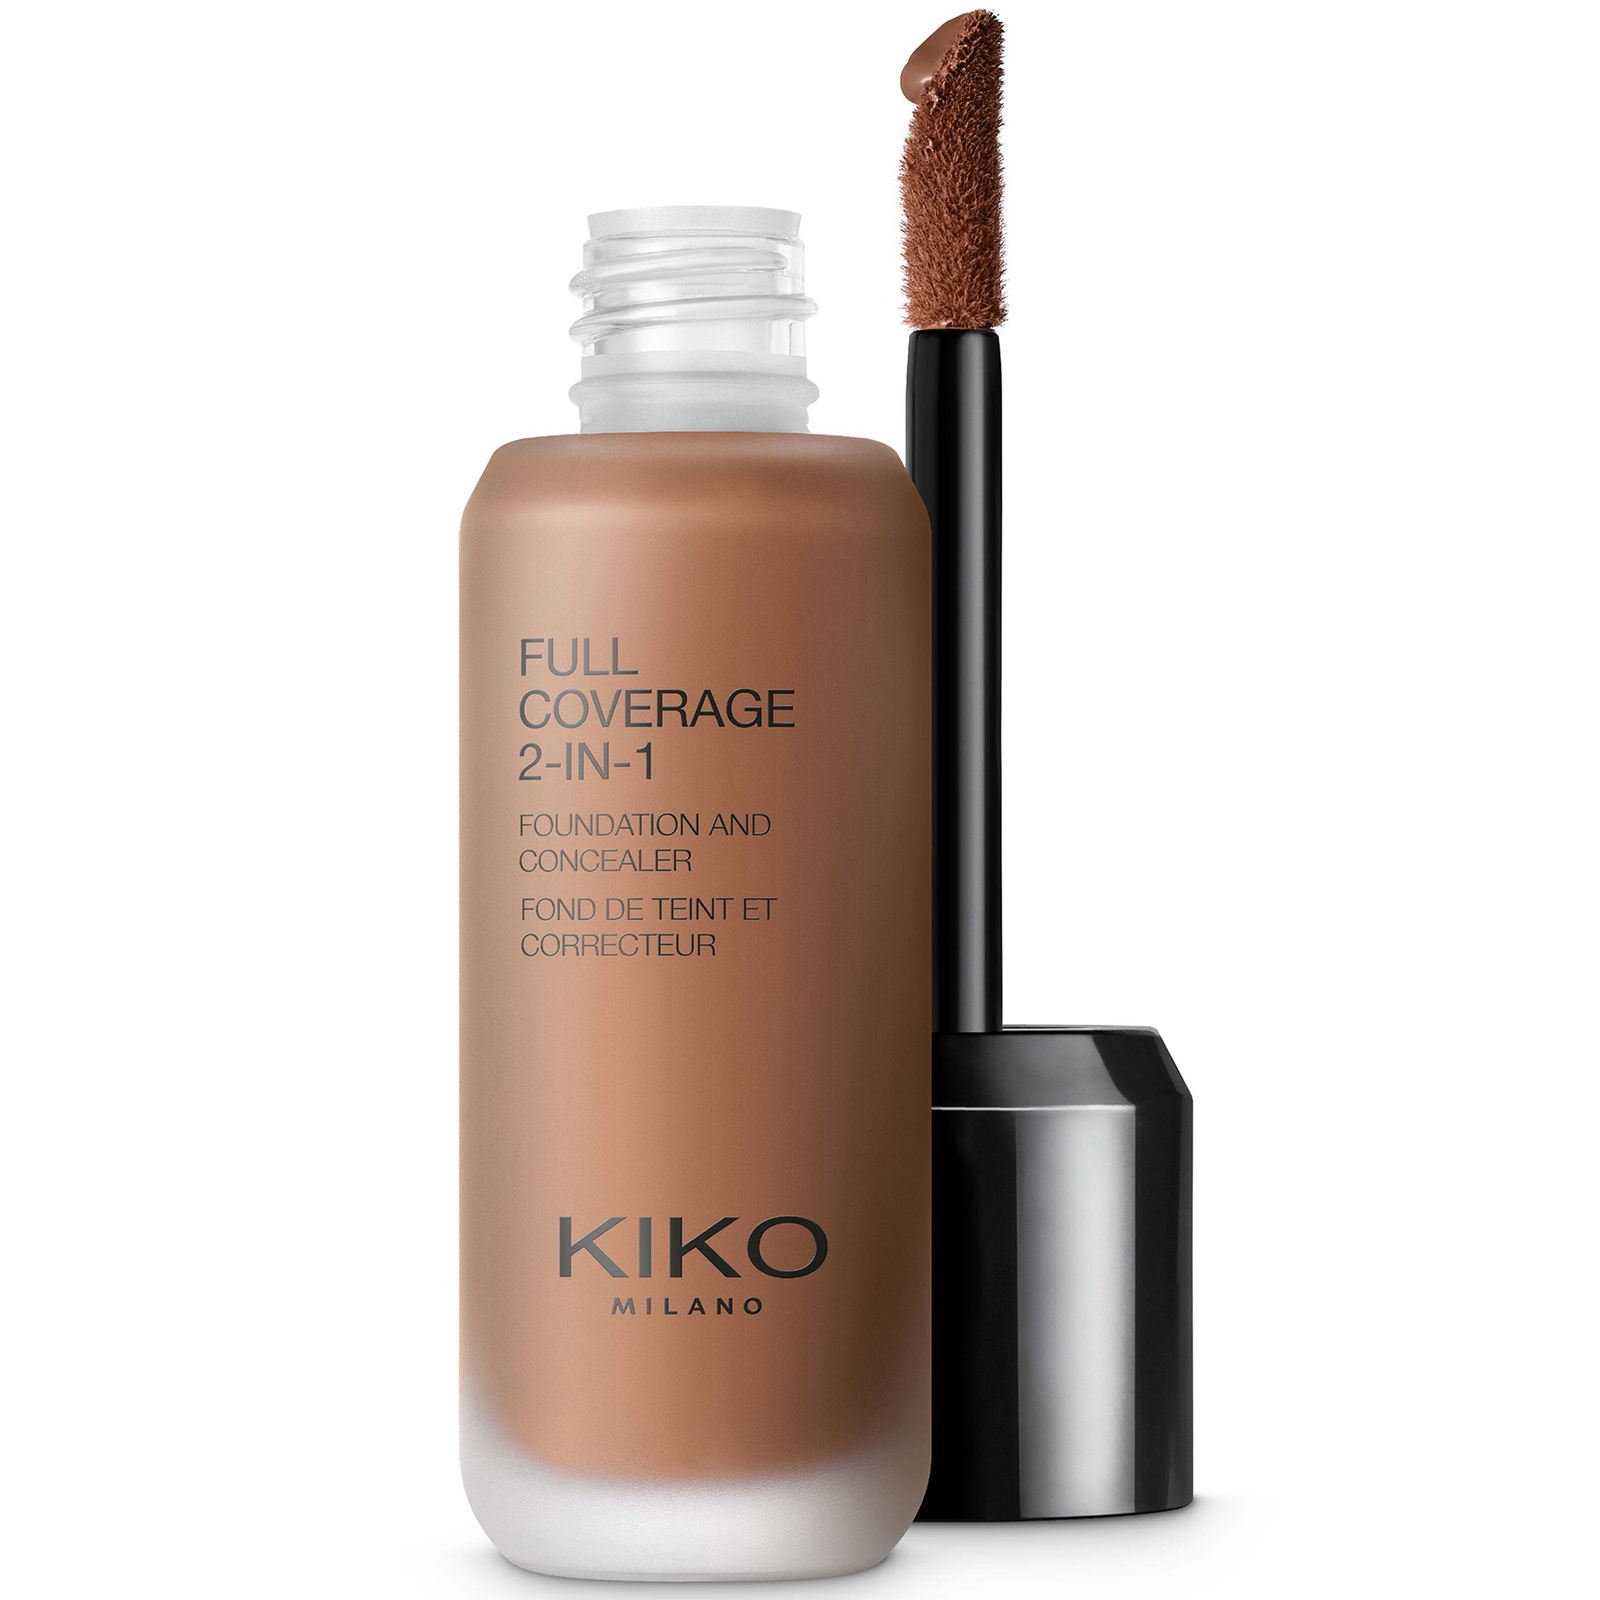 Image of KIKO Milano Full Coverage 2-in-1 Foundation and Concealer 25ml (Various Shades) - 170 Neutral